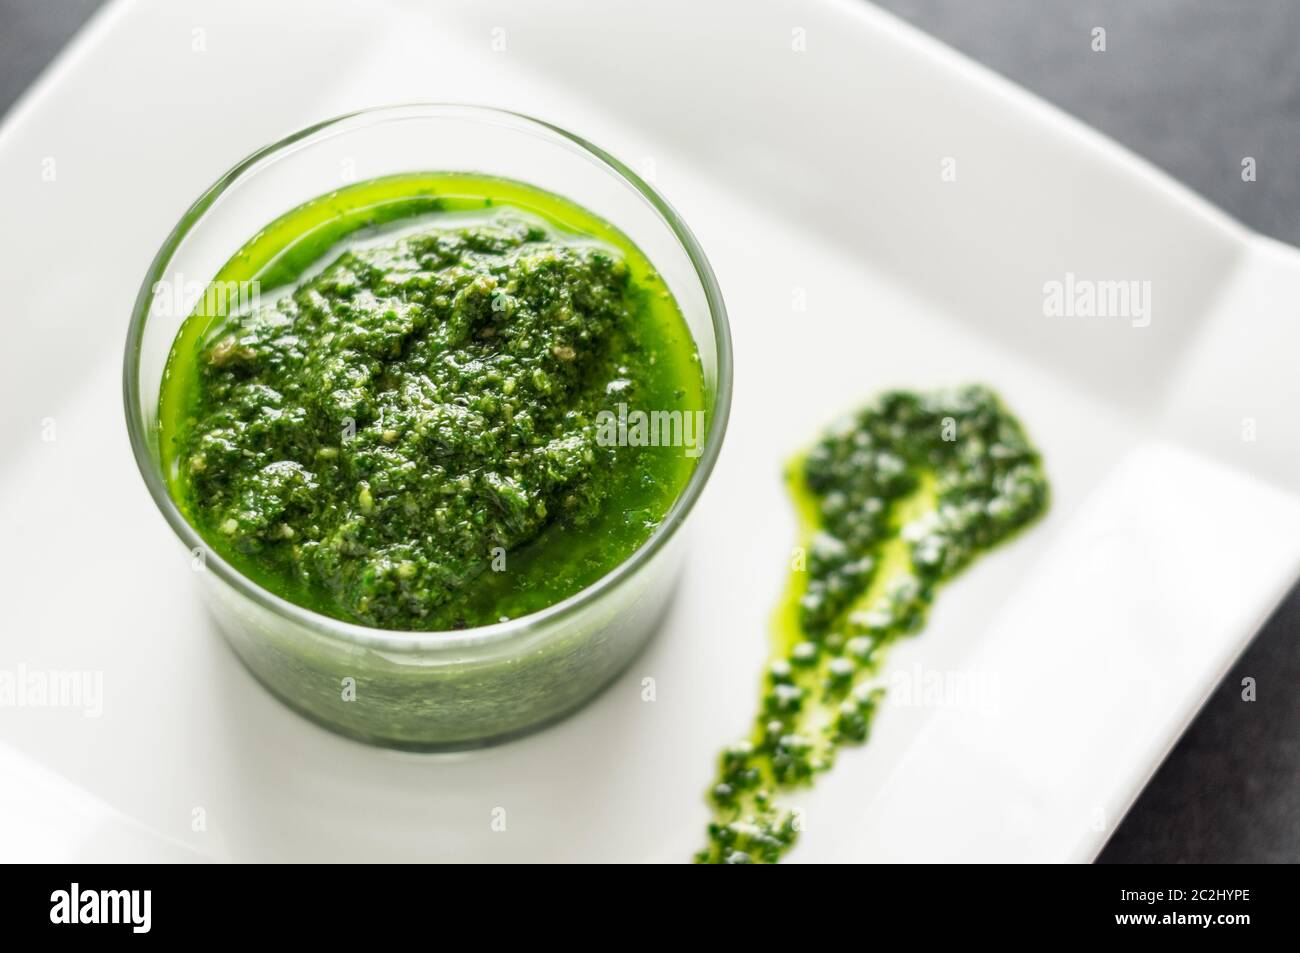 Fresh homemade basil pesto sauce in a glass jar. Originally from italy, pesto is commonly made with basil and used as a sauce for pasta. Stock Photo